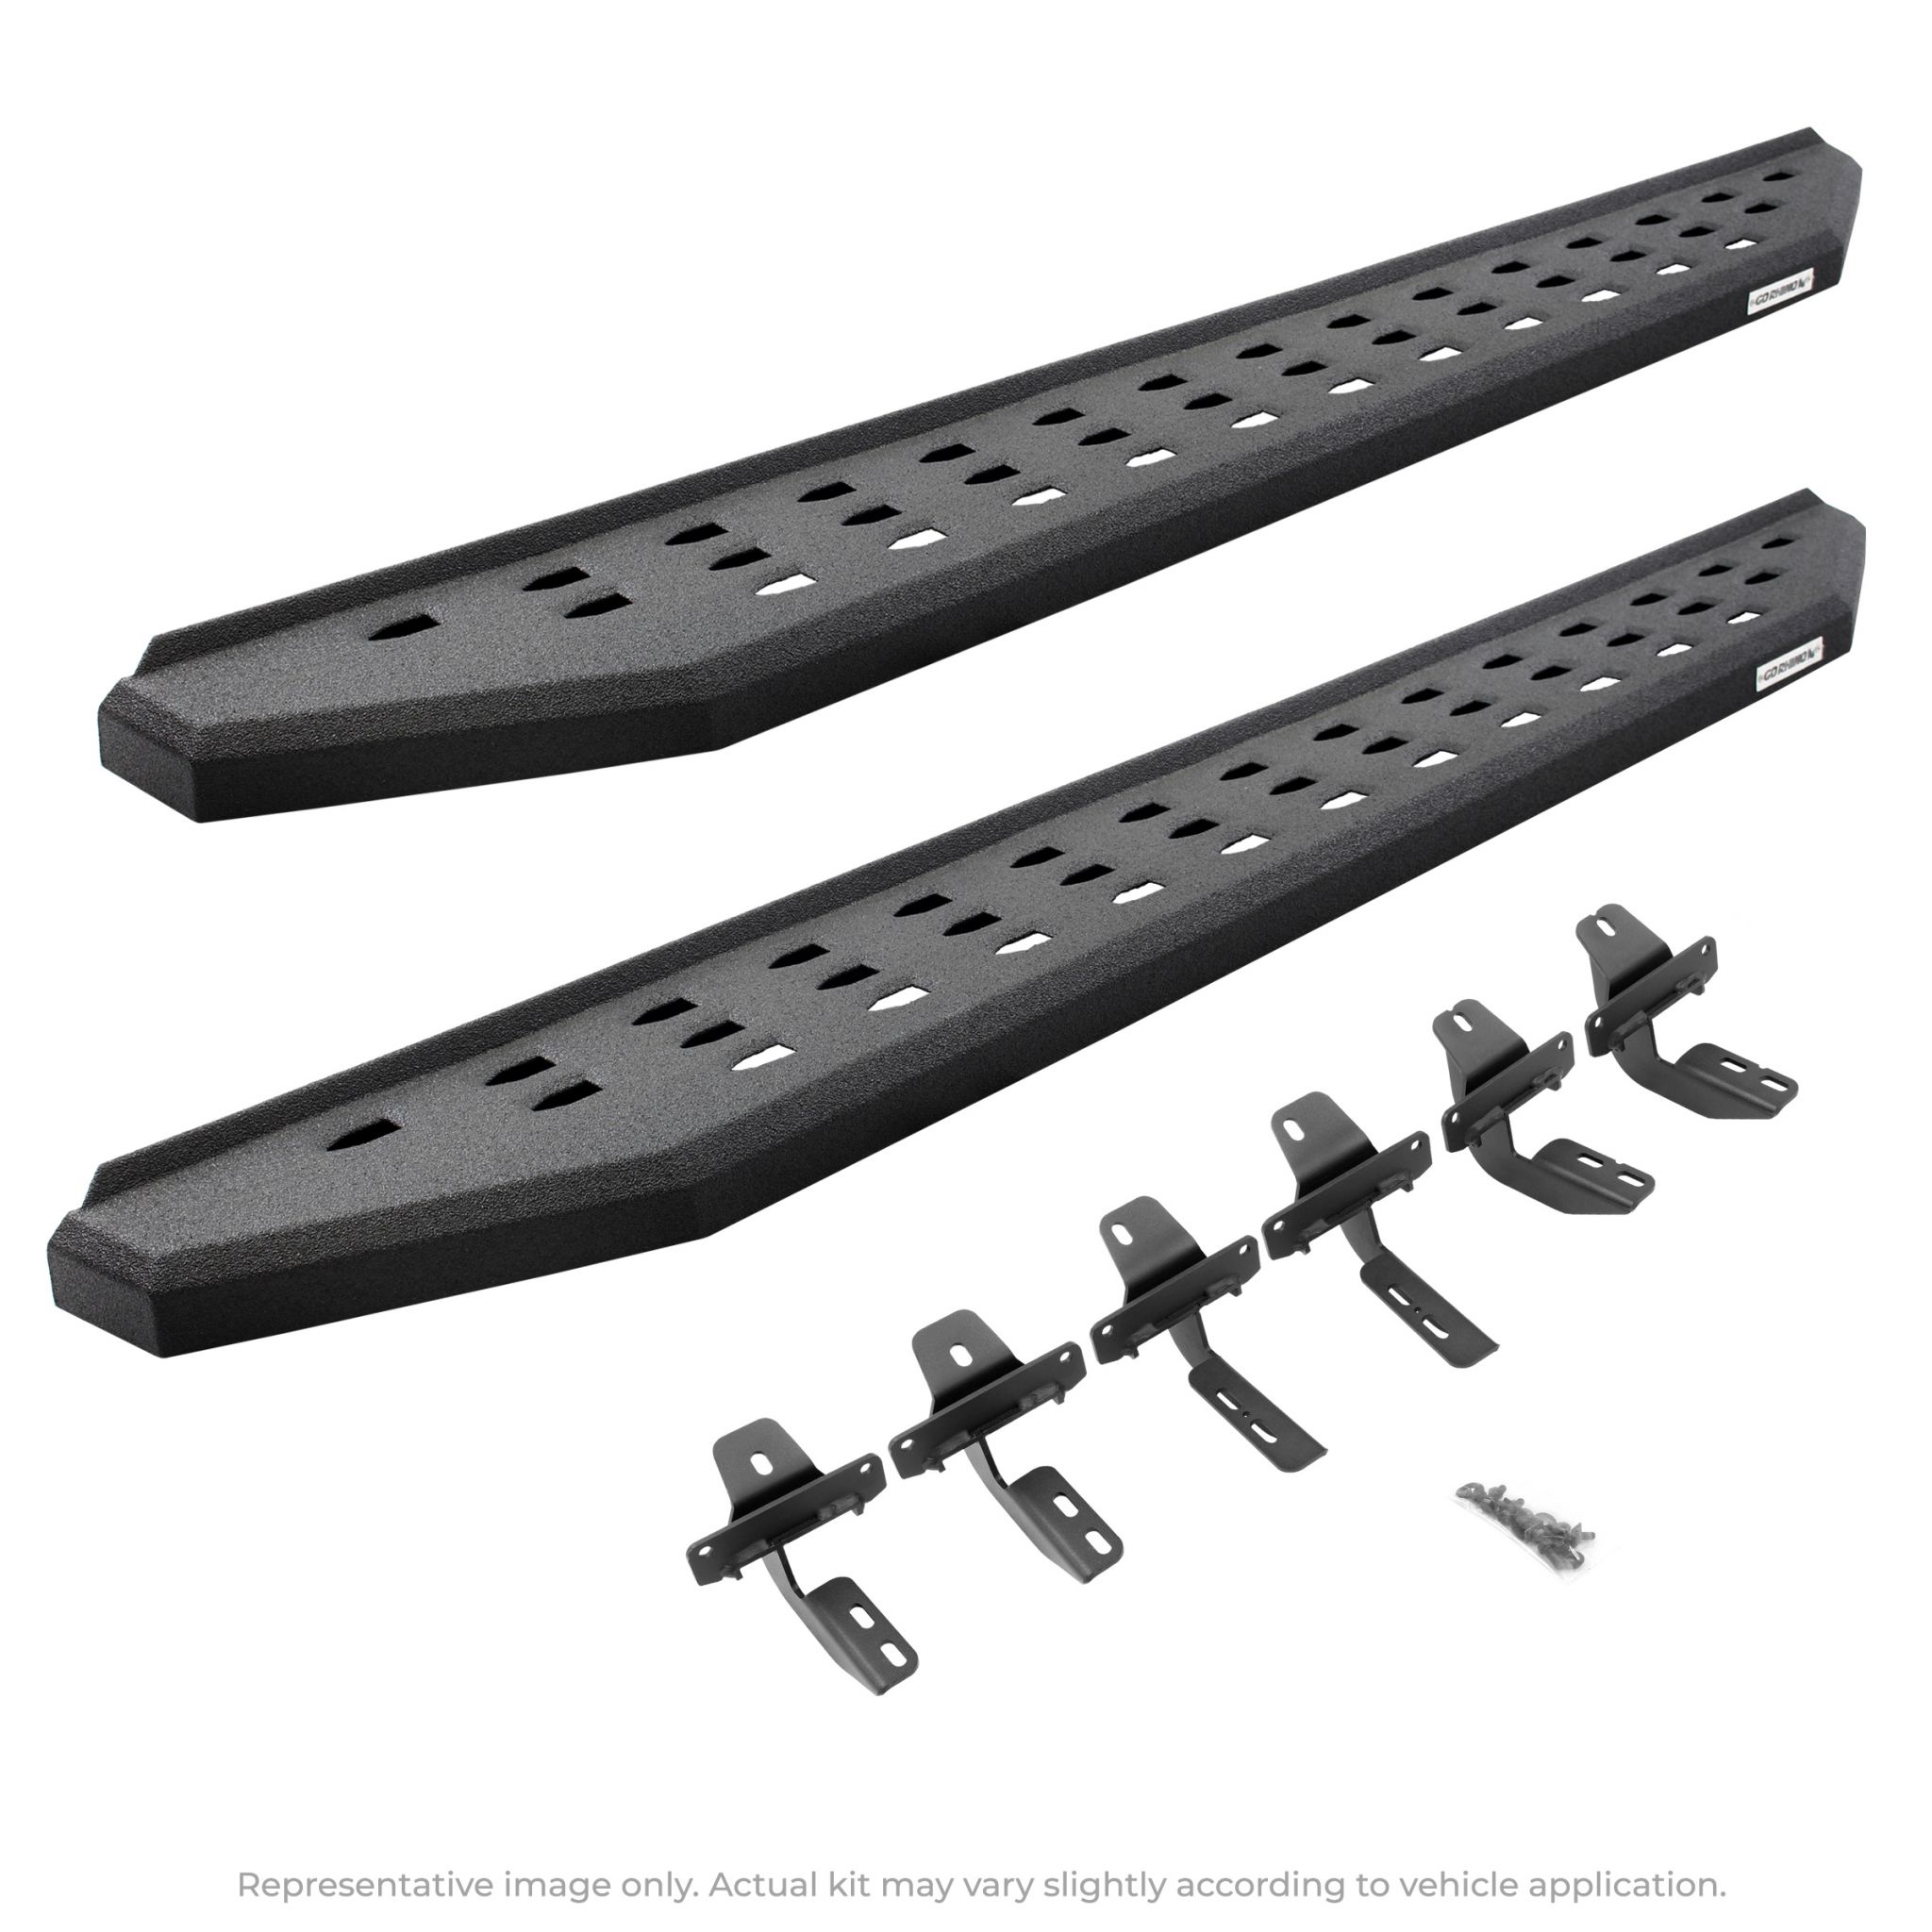 Go Rhino - 69441580T - RB20 Running Boards With Mounting Brackets - Protective Bedliner Coating